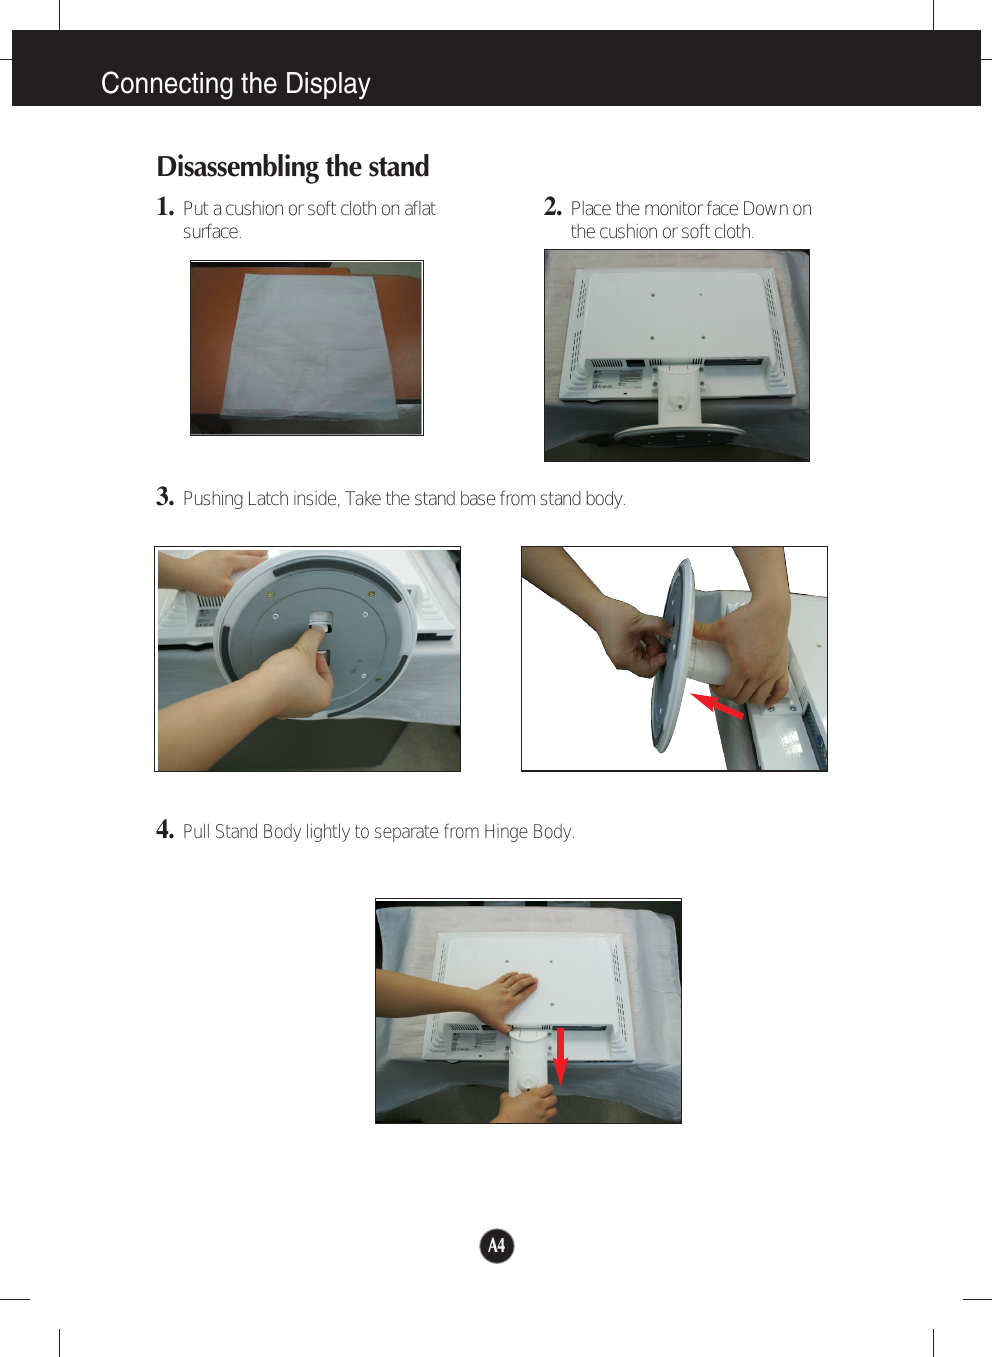 A4Connecting the DisplayDisassembling the stand1. Put a cushion or soft cloth on aflatsurface.3. Pushing Latch inside, Take the stand base from stand body.4.Pull Stand Body lightly to separate from Hinge Body.2. Place the monitor face Down onthe cushion or soft cloth.